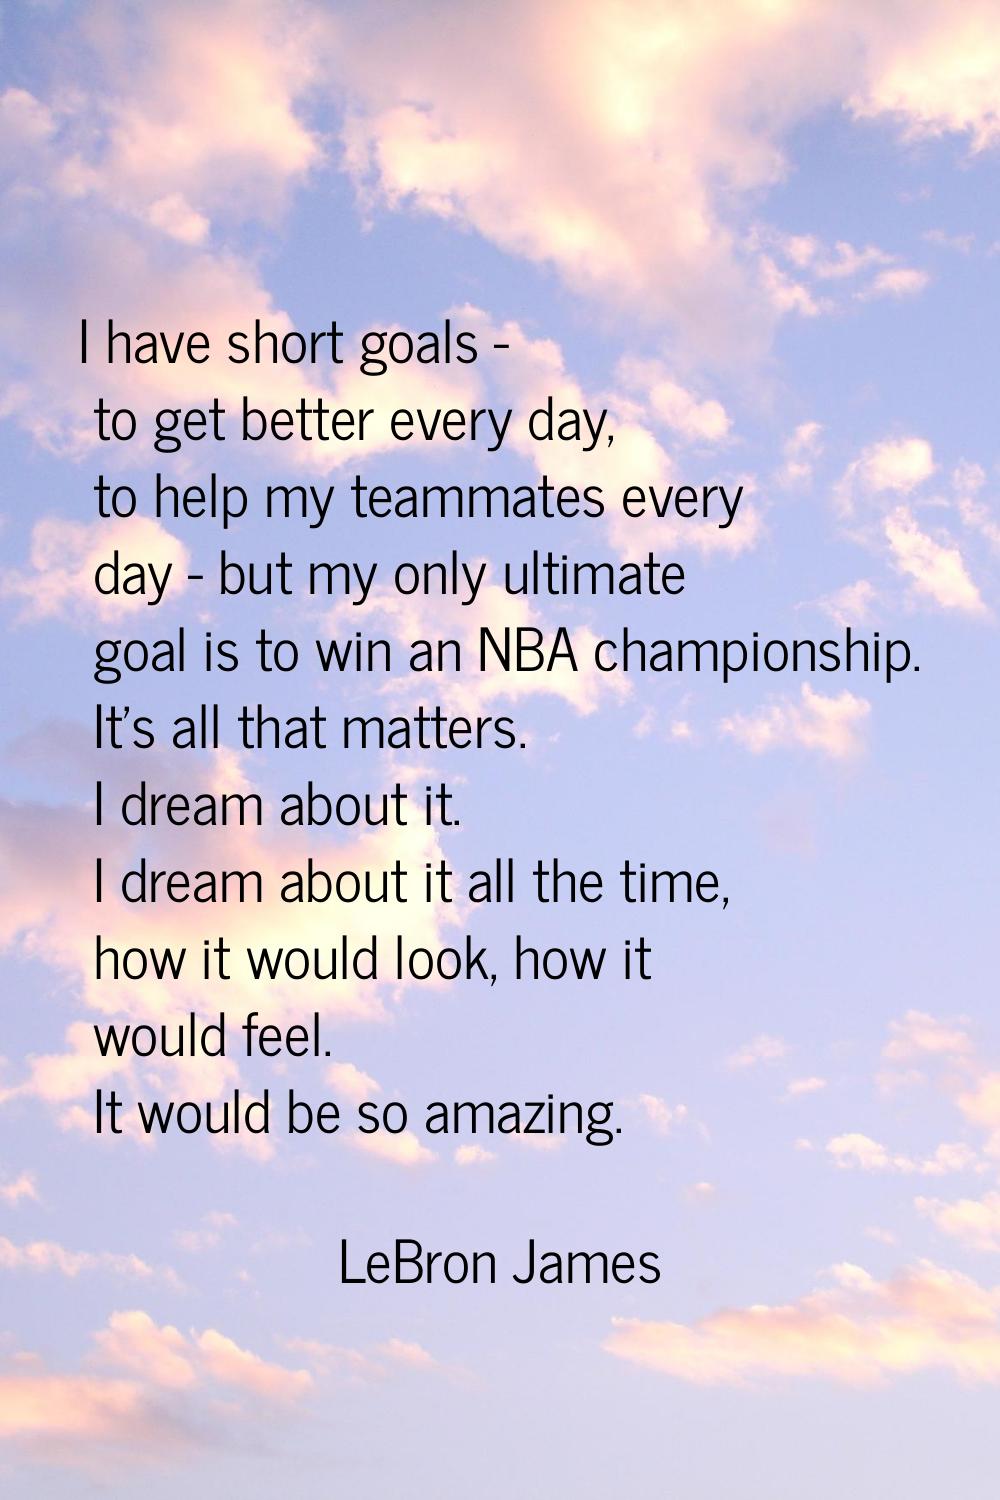 I have short goals - to get better every day, to help my teammates every day - but my only ultimate